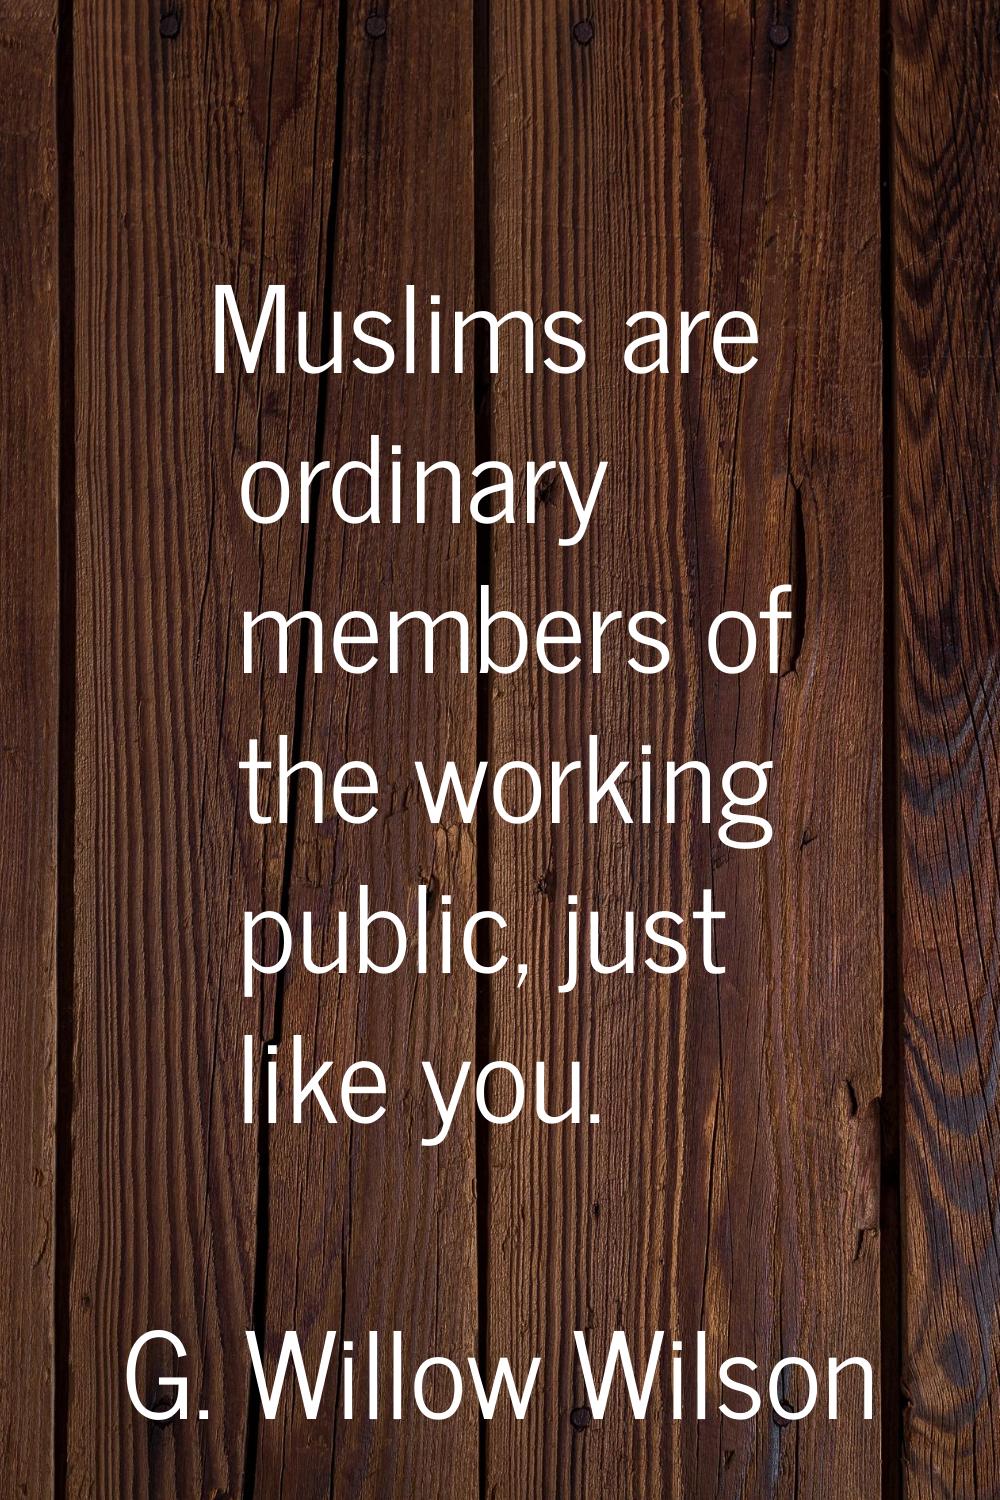 Muslims are ordinary members of the working public, just like you.